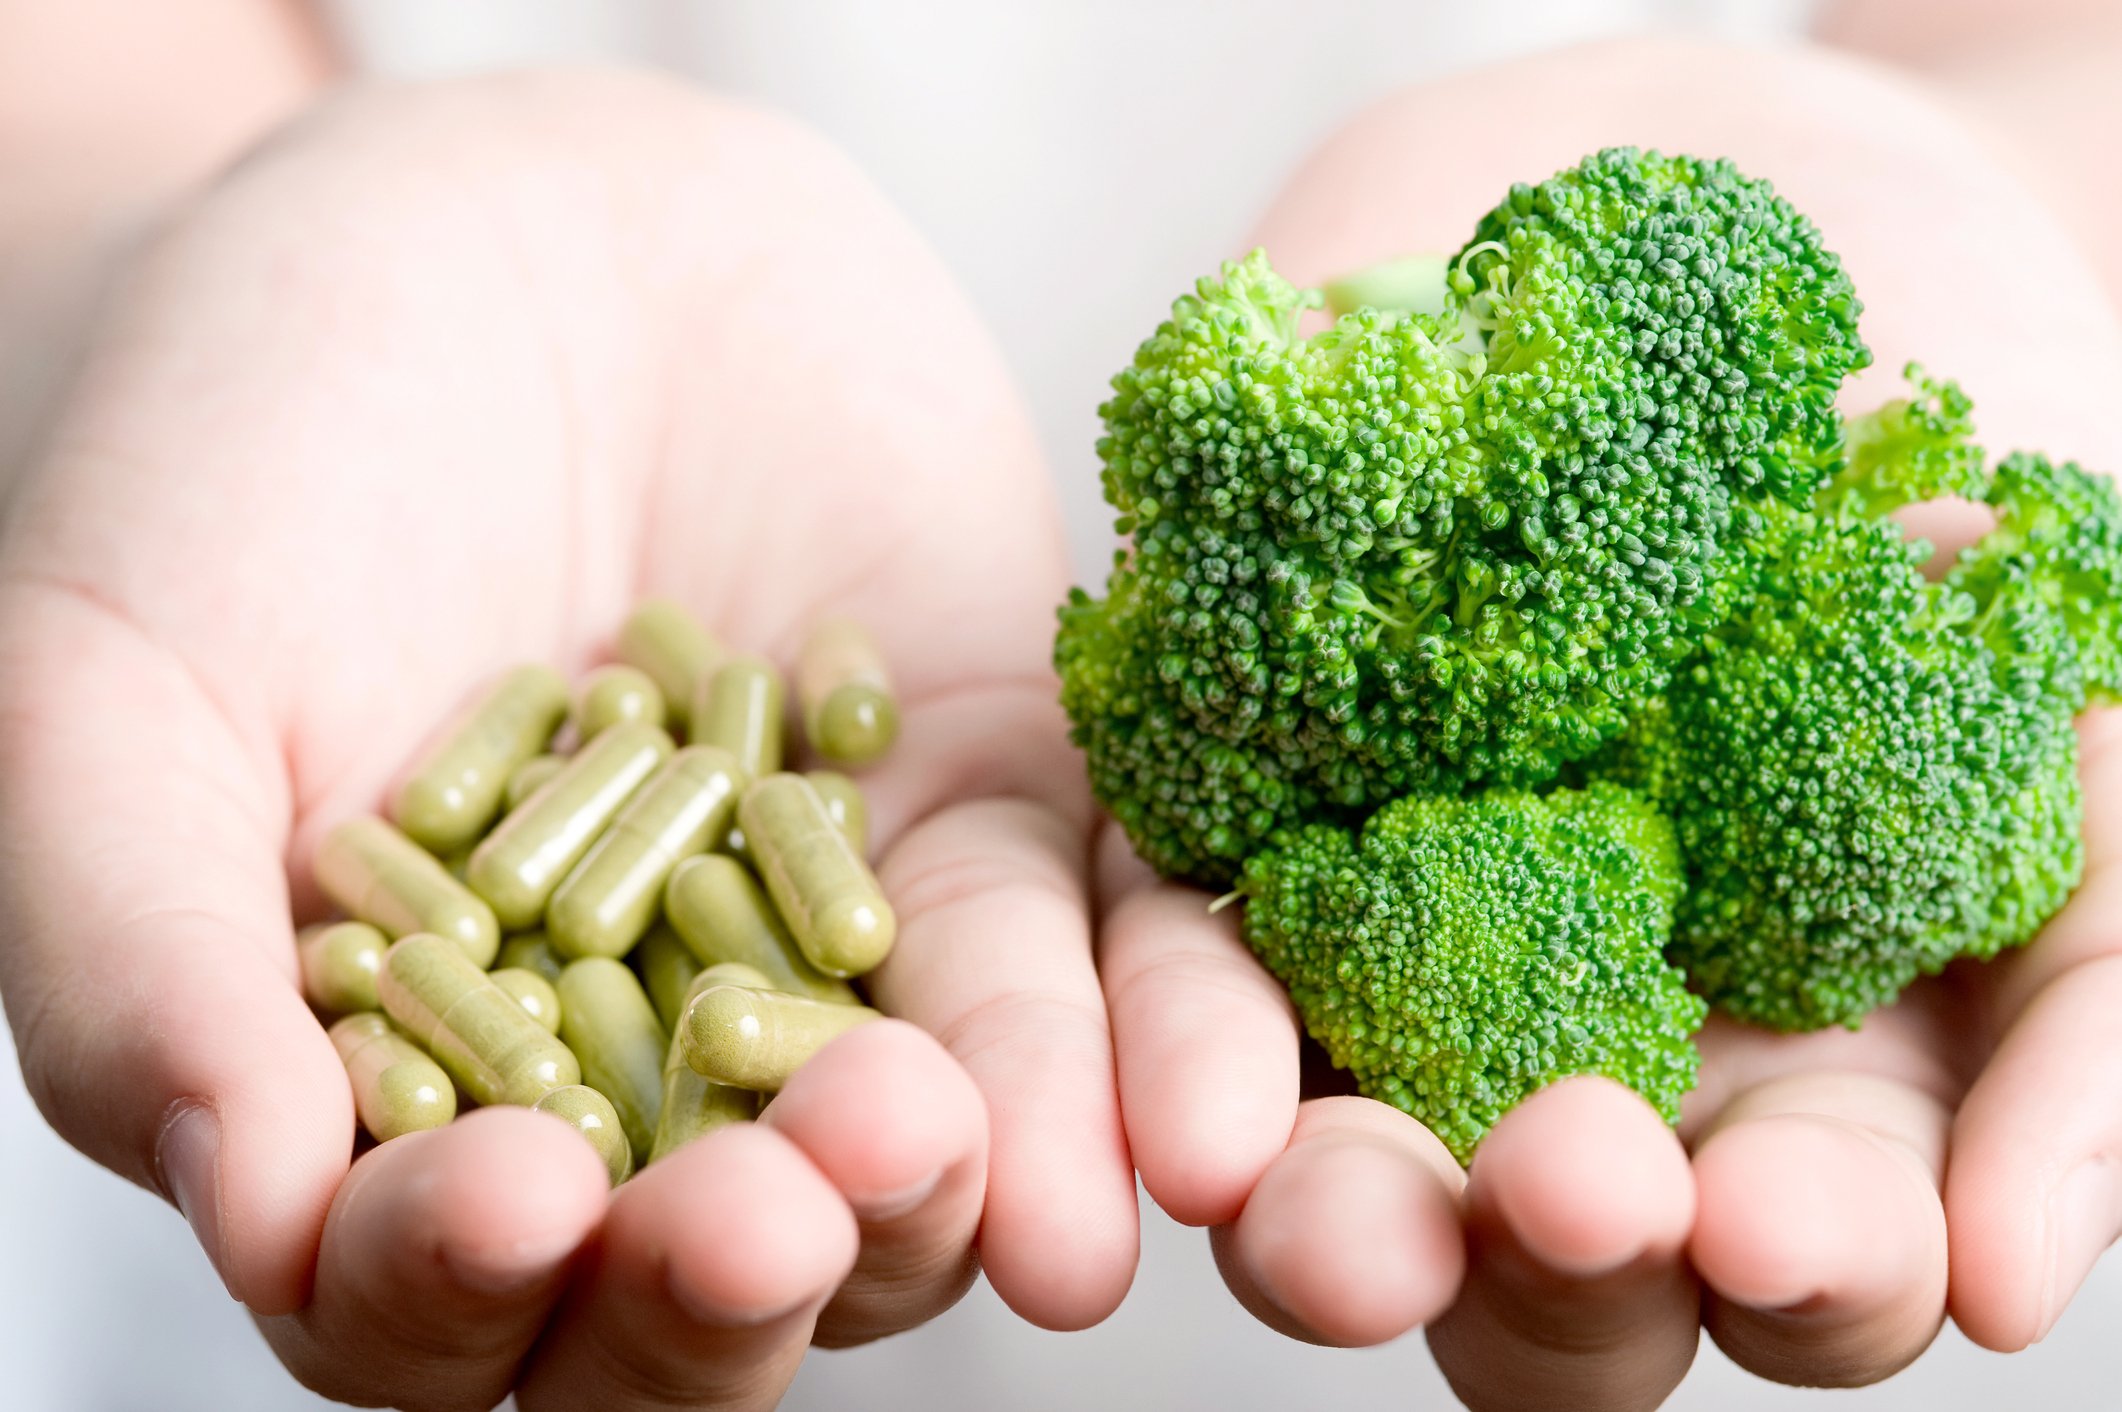 Which is better, nutrition from food or supplements?